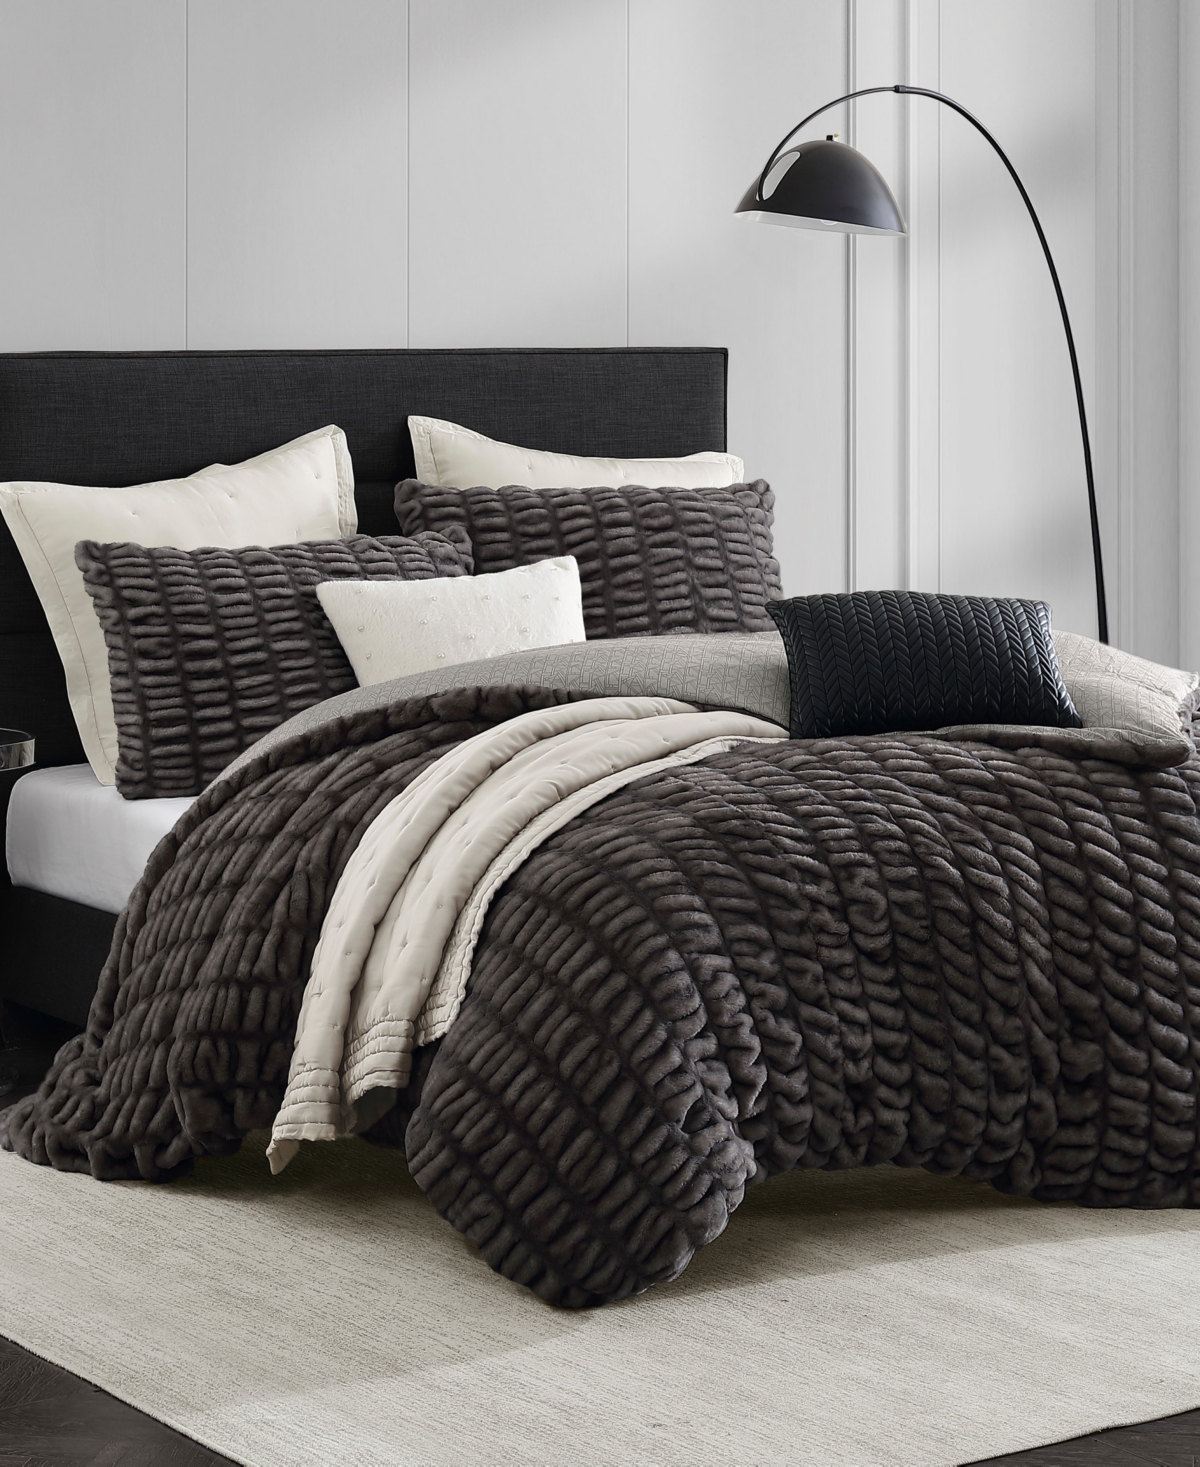 Karl Lagerfeld Ruched 3 Piece Duvet Cover Set, King Bedding In Brown